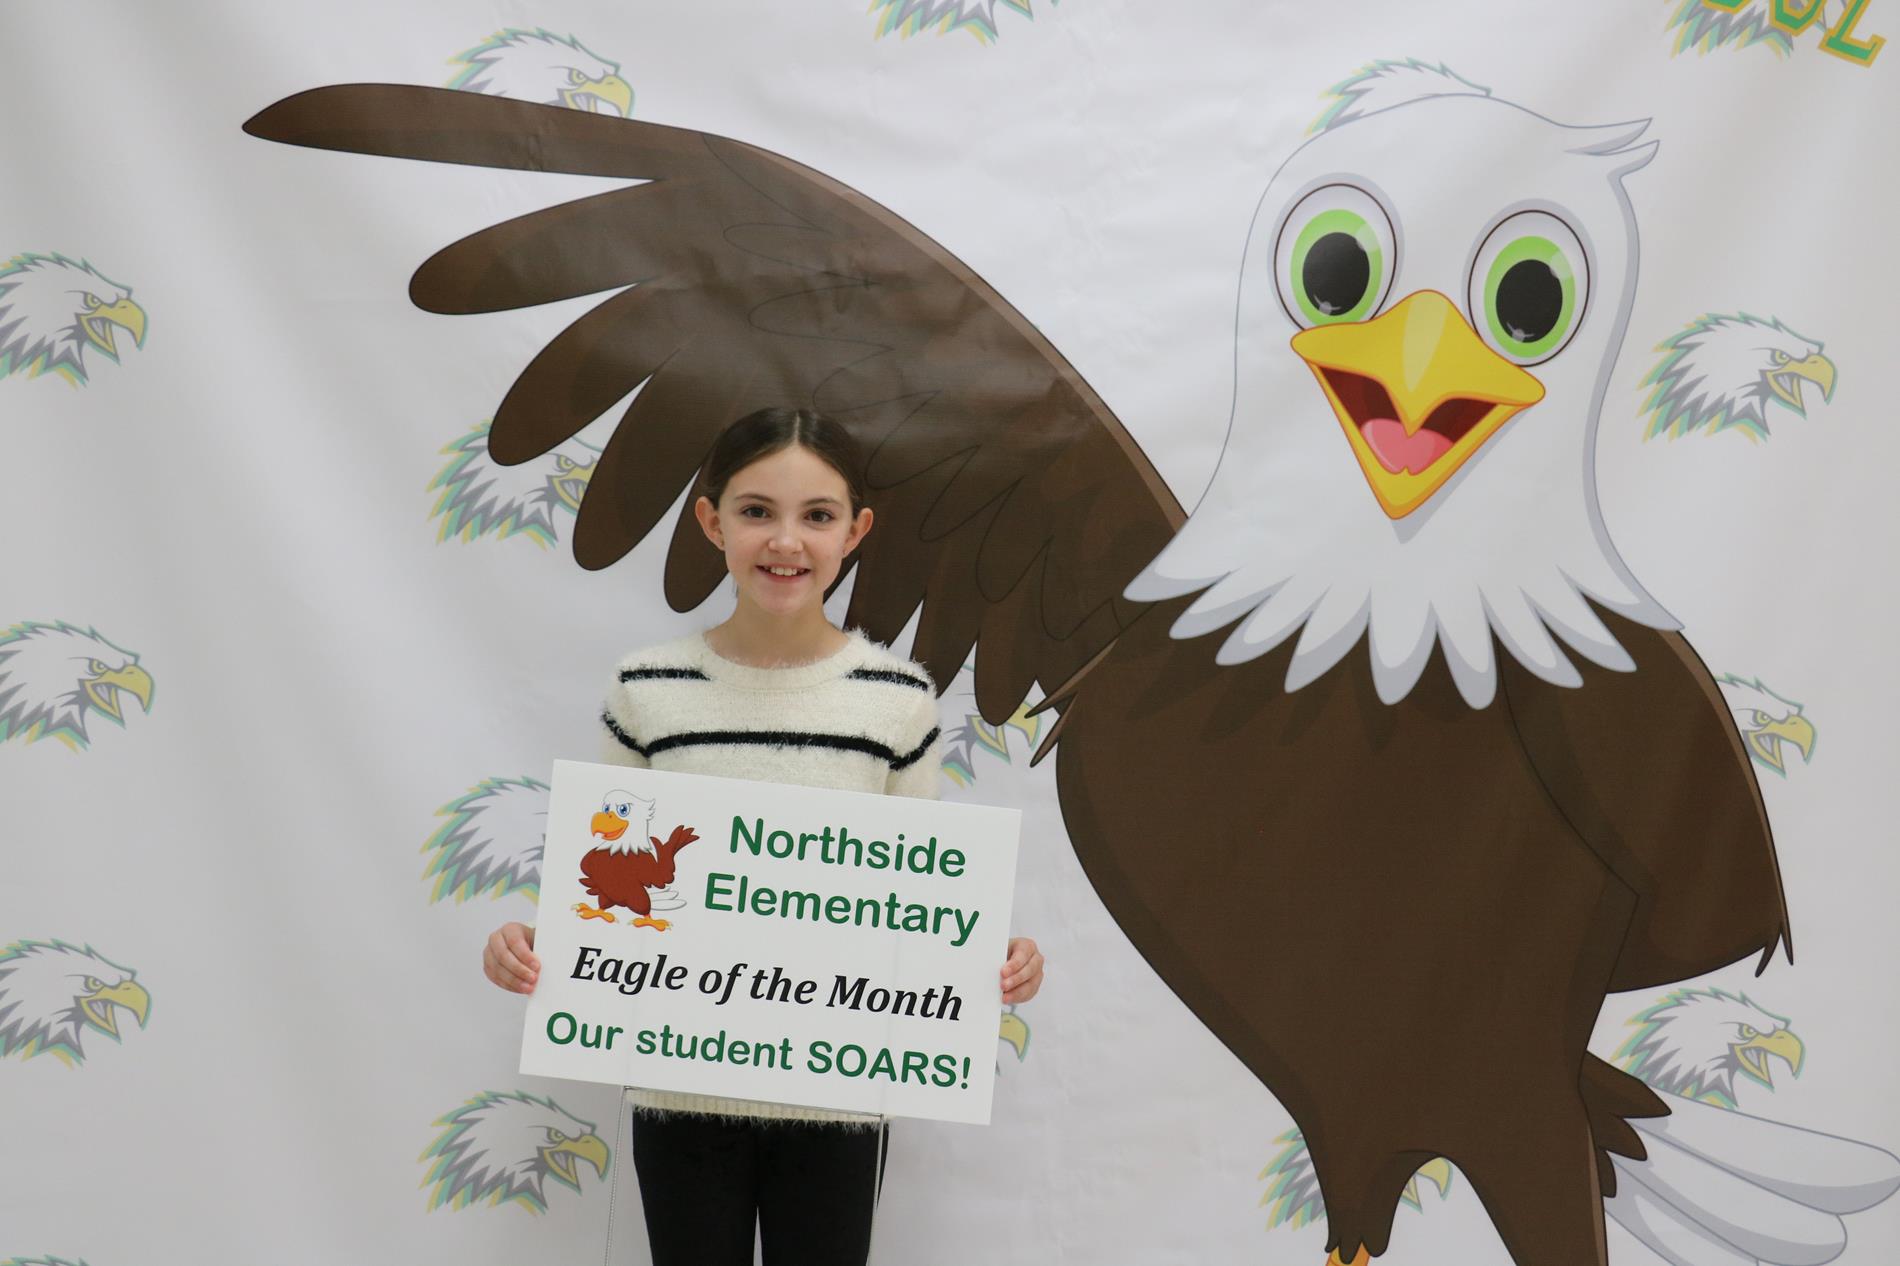 Eagle of the Month